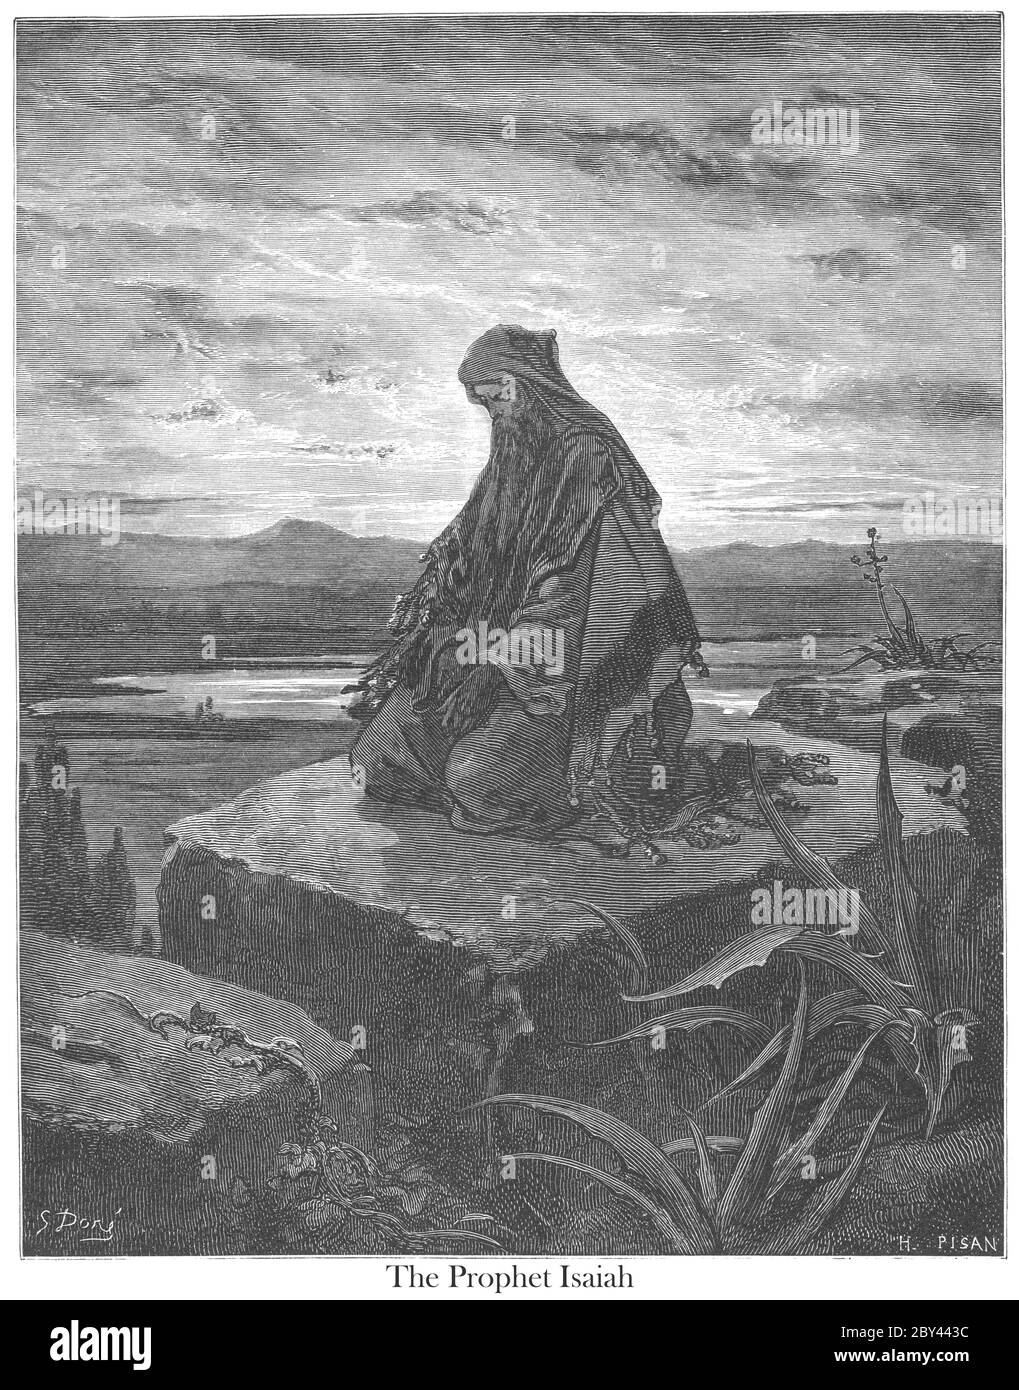 The Prophet Isaiah Isaiah 6:8-9 From the book 'Bible Gallery' Illustrated by Gustave Dore with Memoir of Dore and Descriptive Letter-press by Talbot W. Chambers D.D. Published by Cassell & Company Limited in London and simultaneously by Mame in Tours, France in 1866 Stock Photo